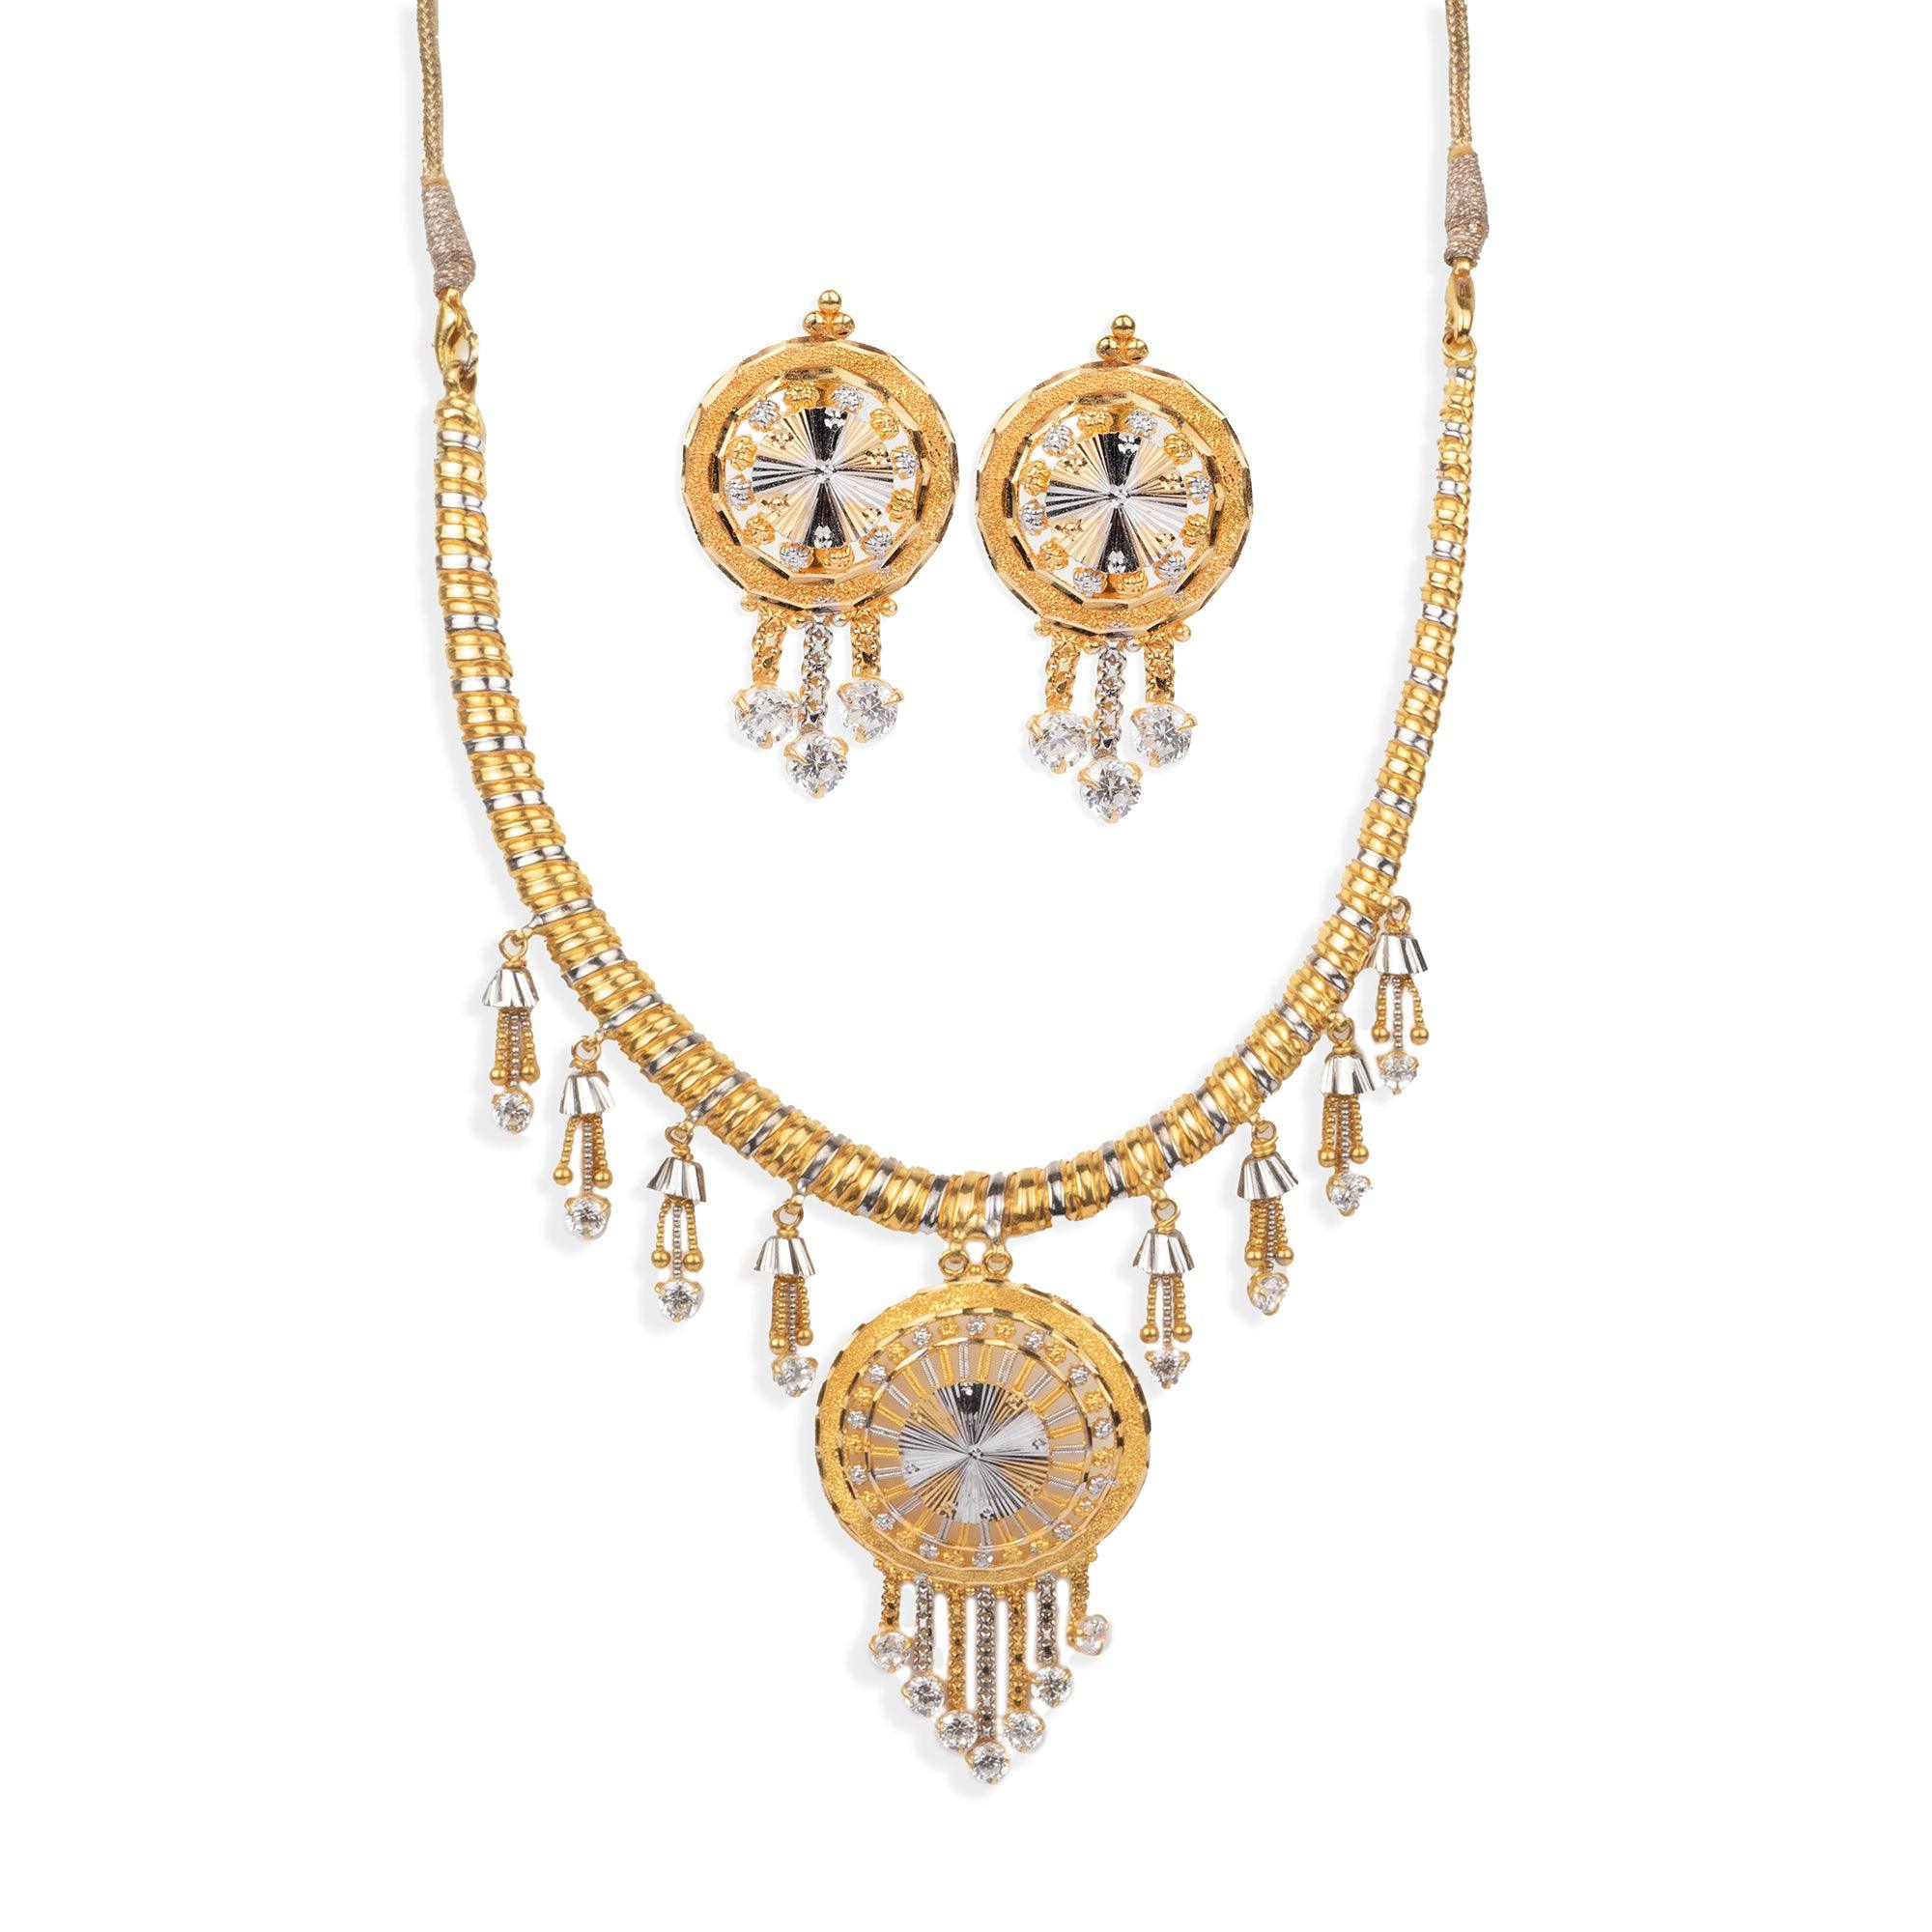 22ct Gold Necklace and Earrings set with Cubic Zirconia stones (40g) N&E-5201 - Minar Jewellers